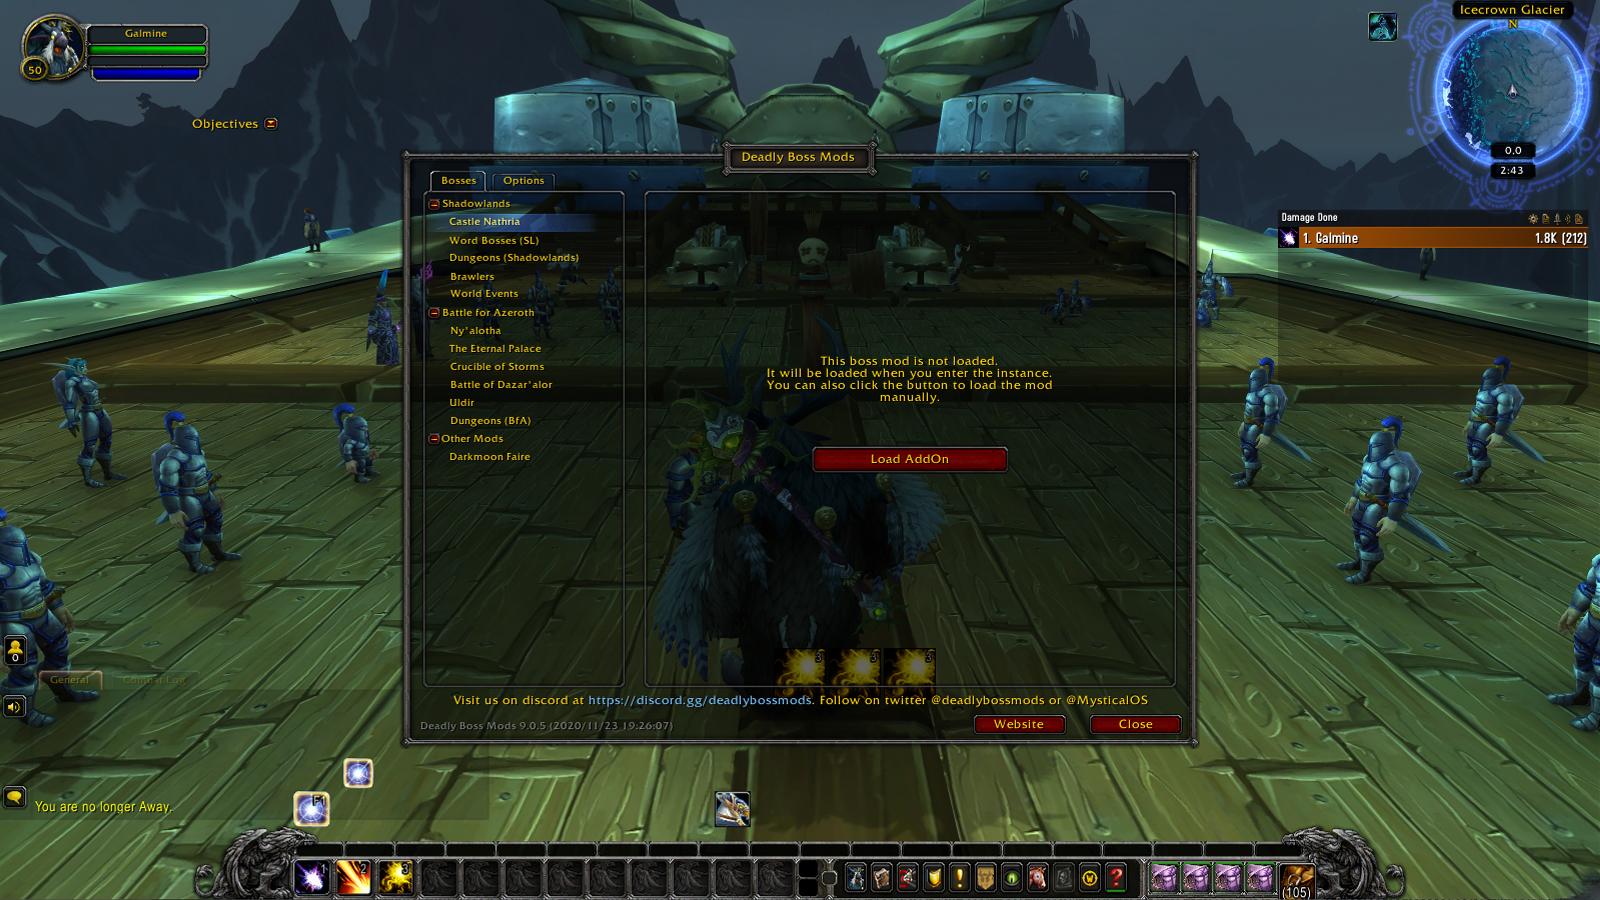 Deadly Boss Mods user interface panel shown in World of Warcraft